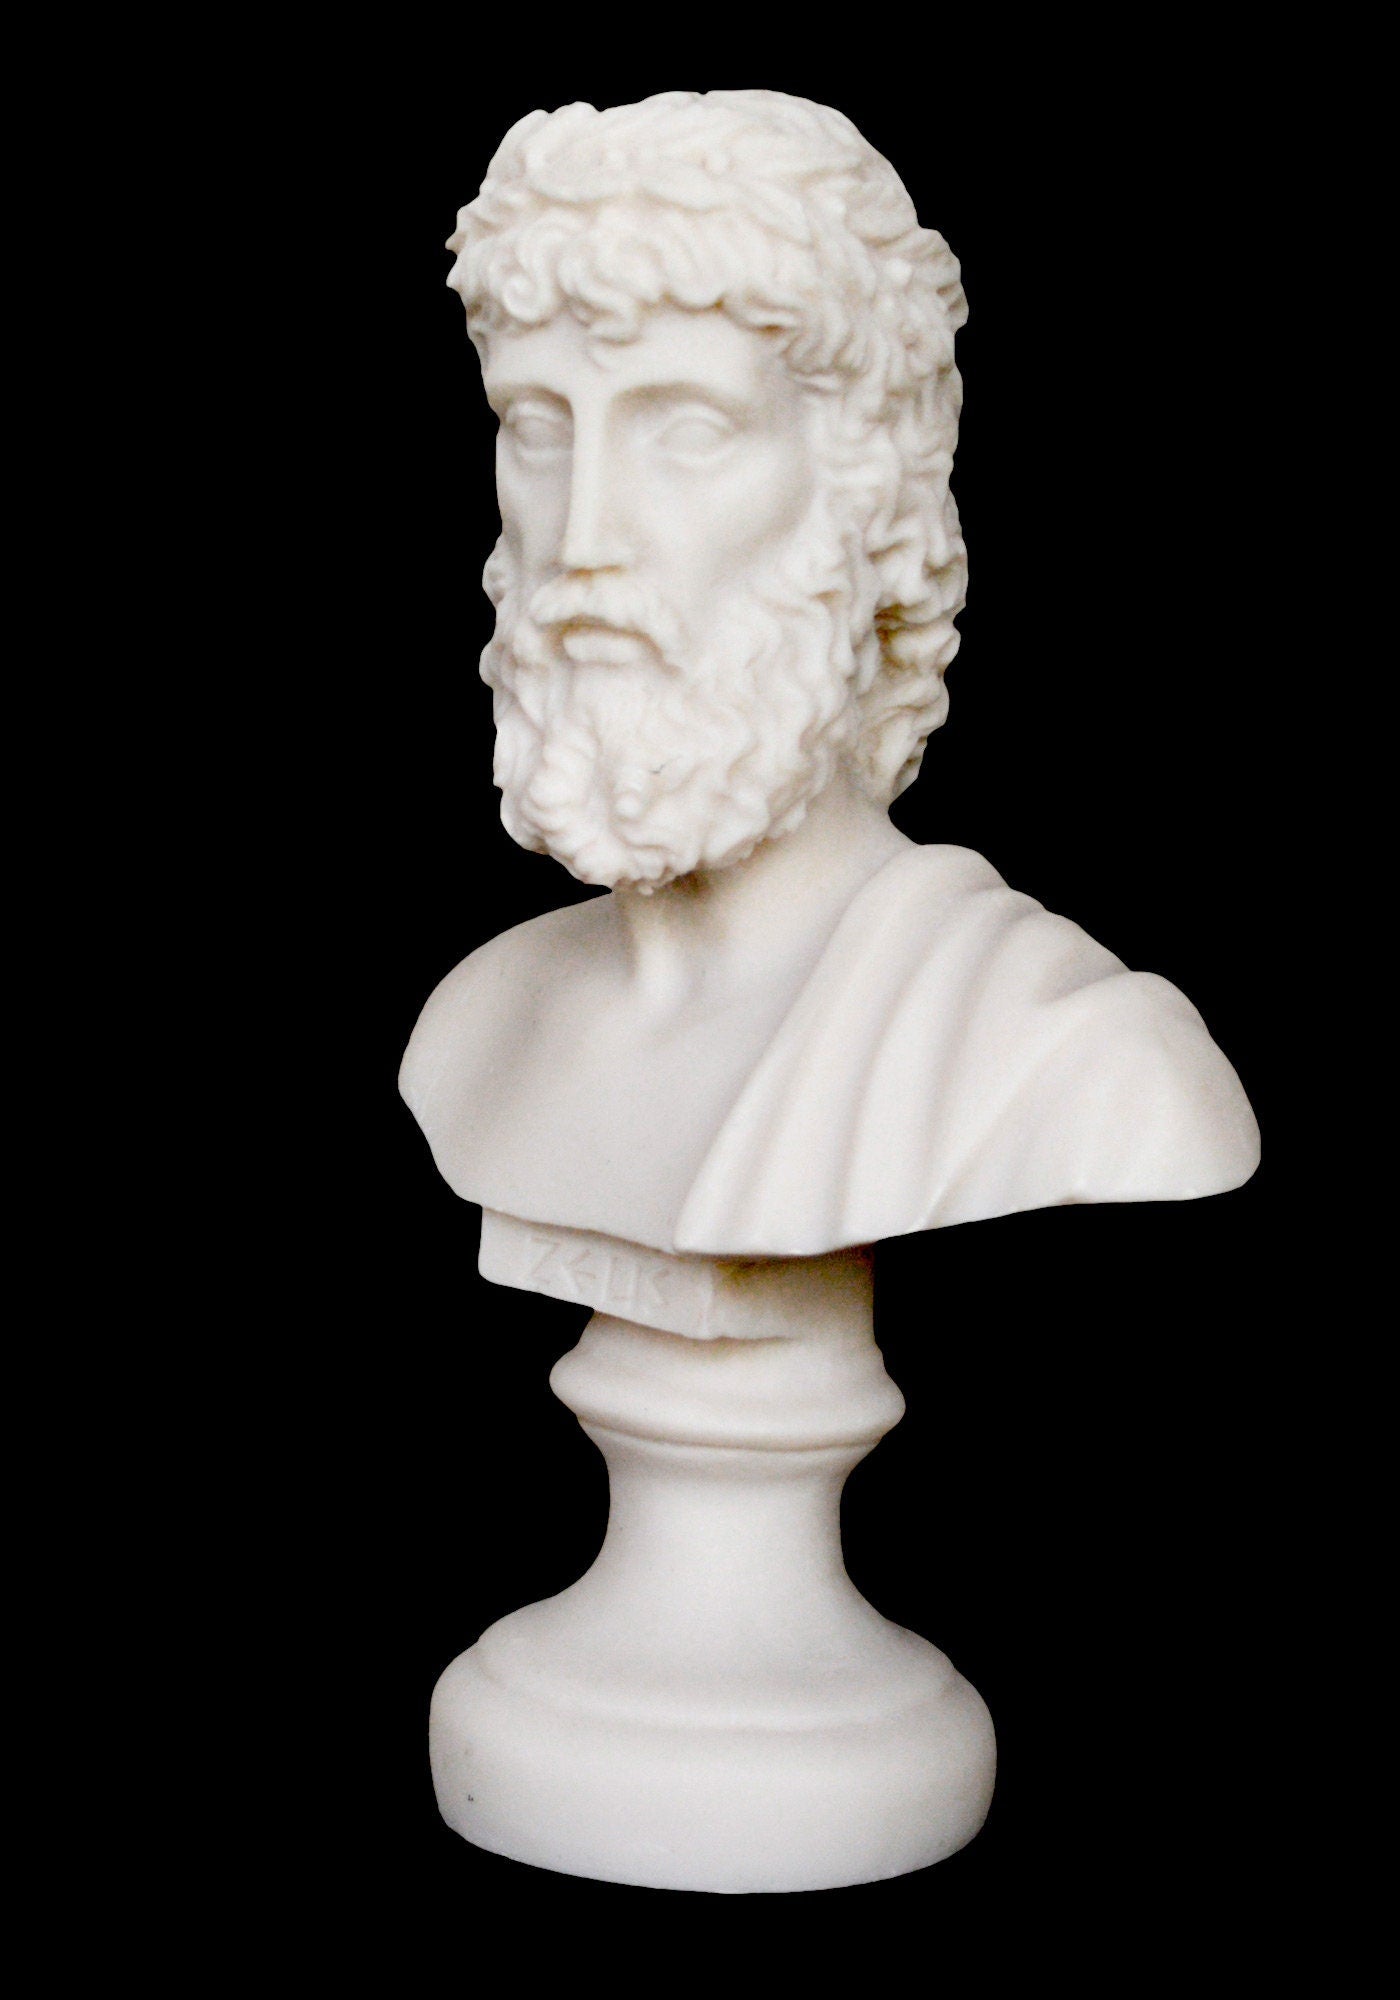 Zeus Jupiter Bust - Greek Roman God of the Sky, Law and Order, Destiny and Fate - King of the Gods of Mount Olympus - Alabaster Statue